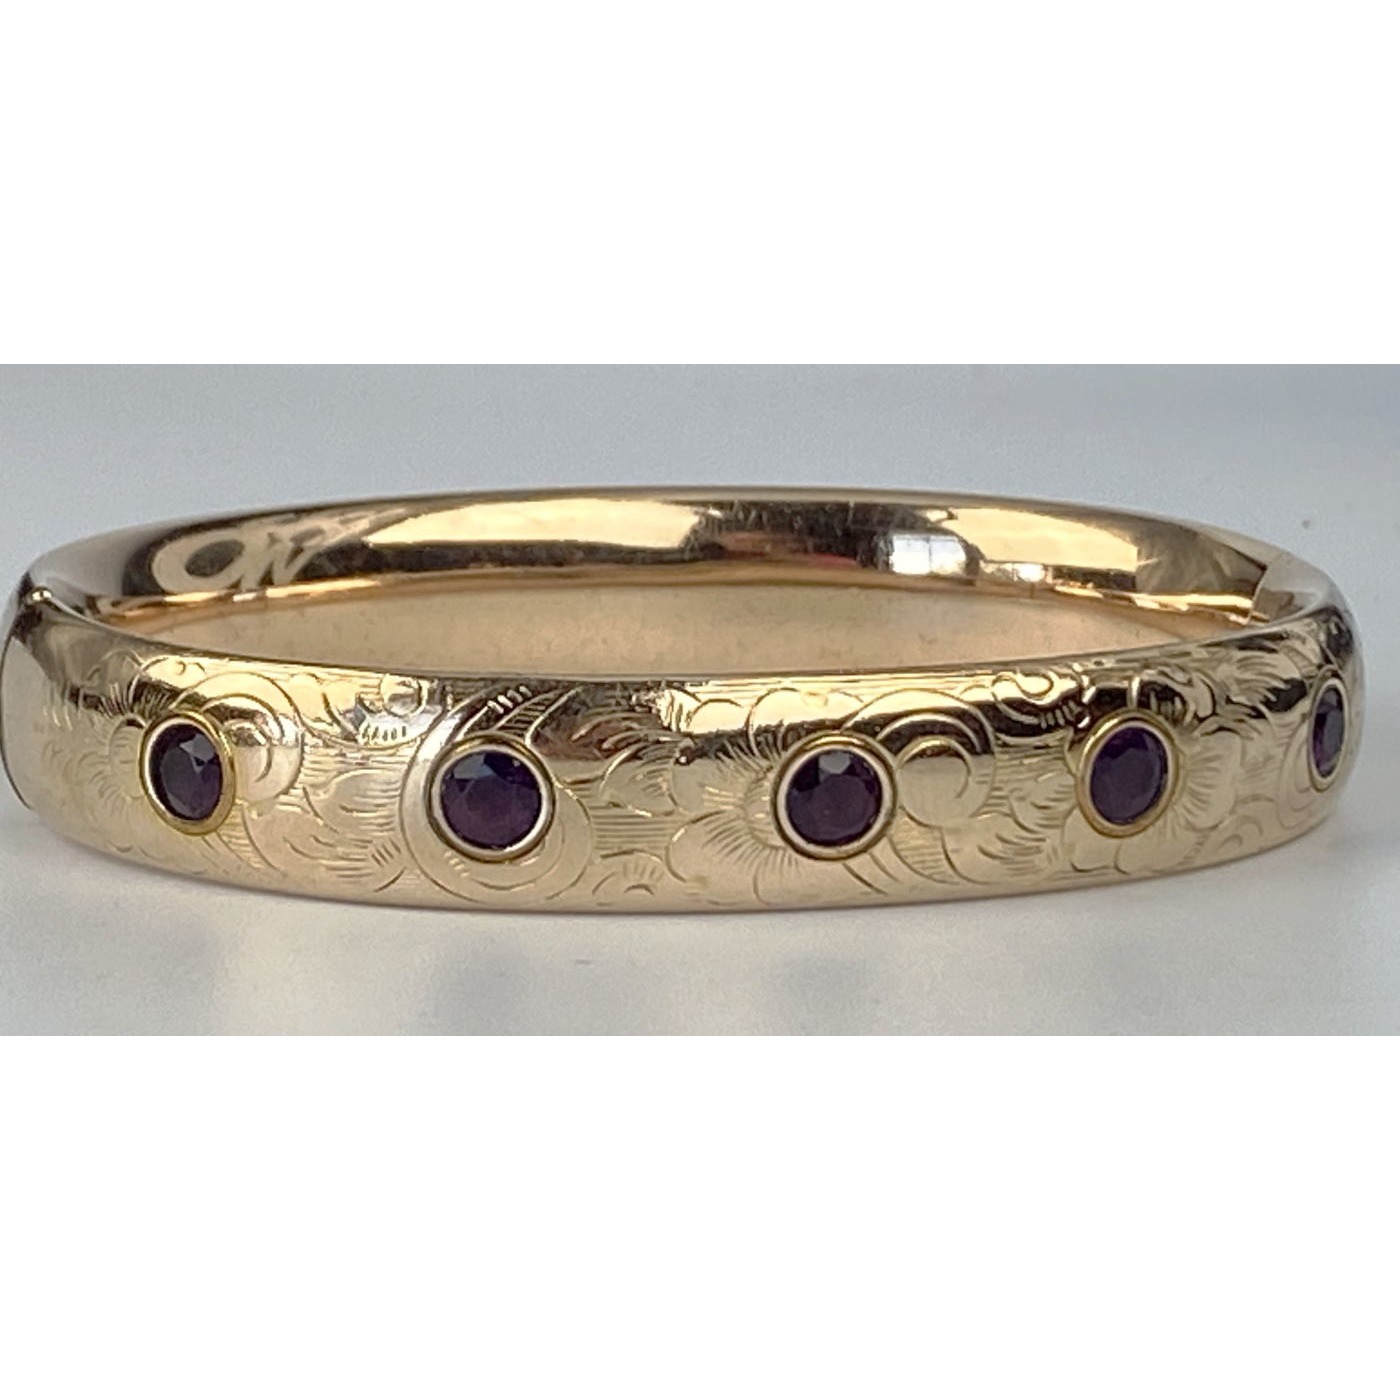 Exceptional Multi-stone Amethyst Engagement Bangle